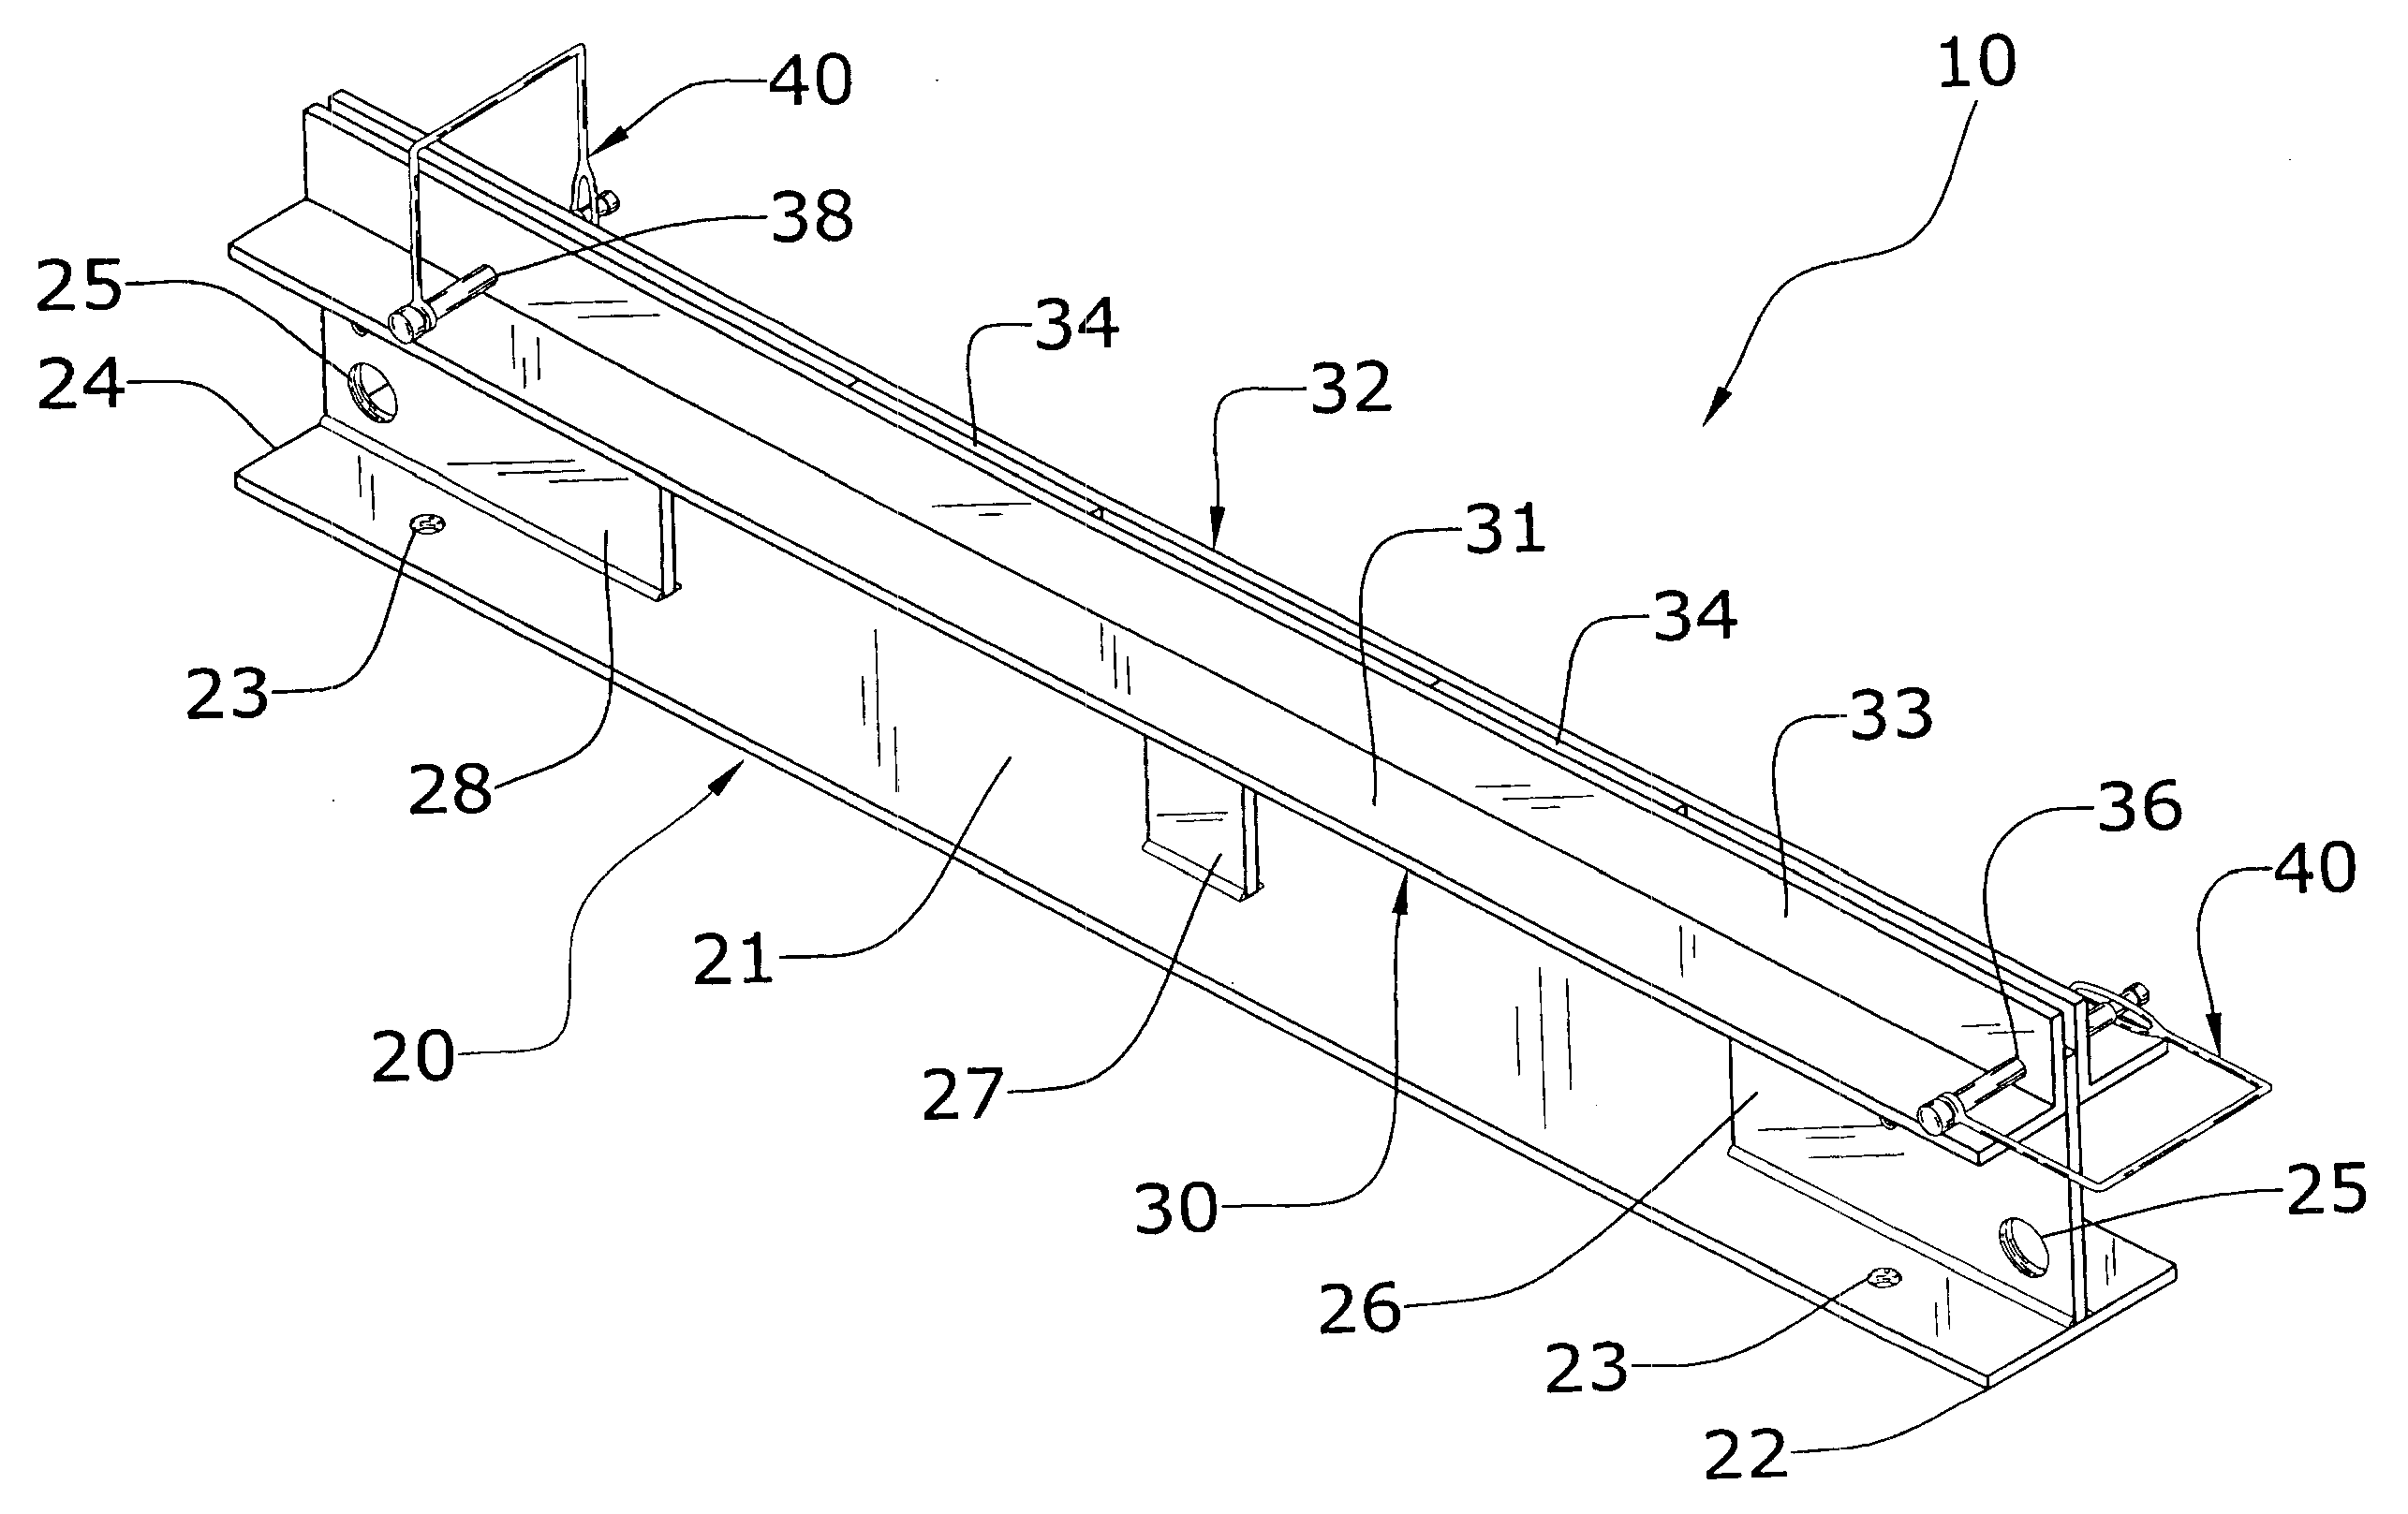 Fire hose safety anchor and method